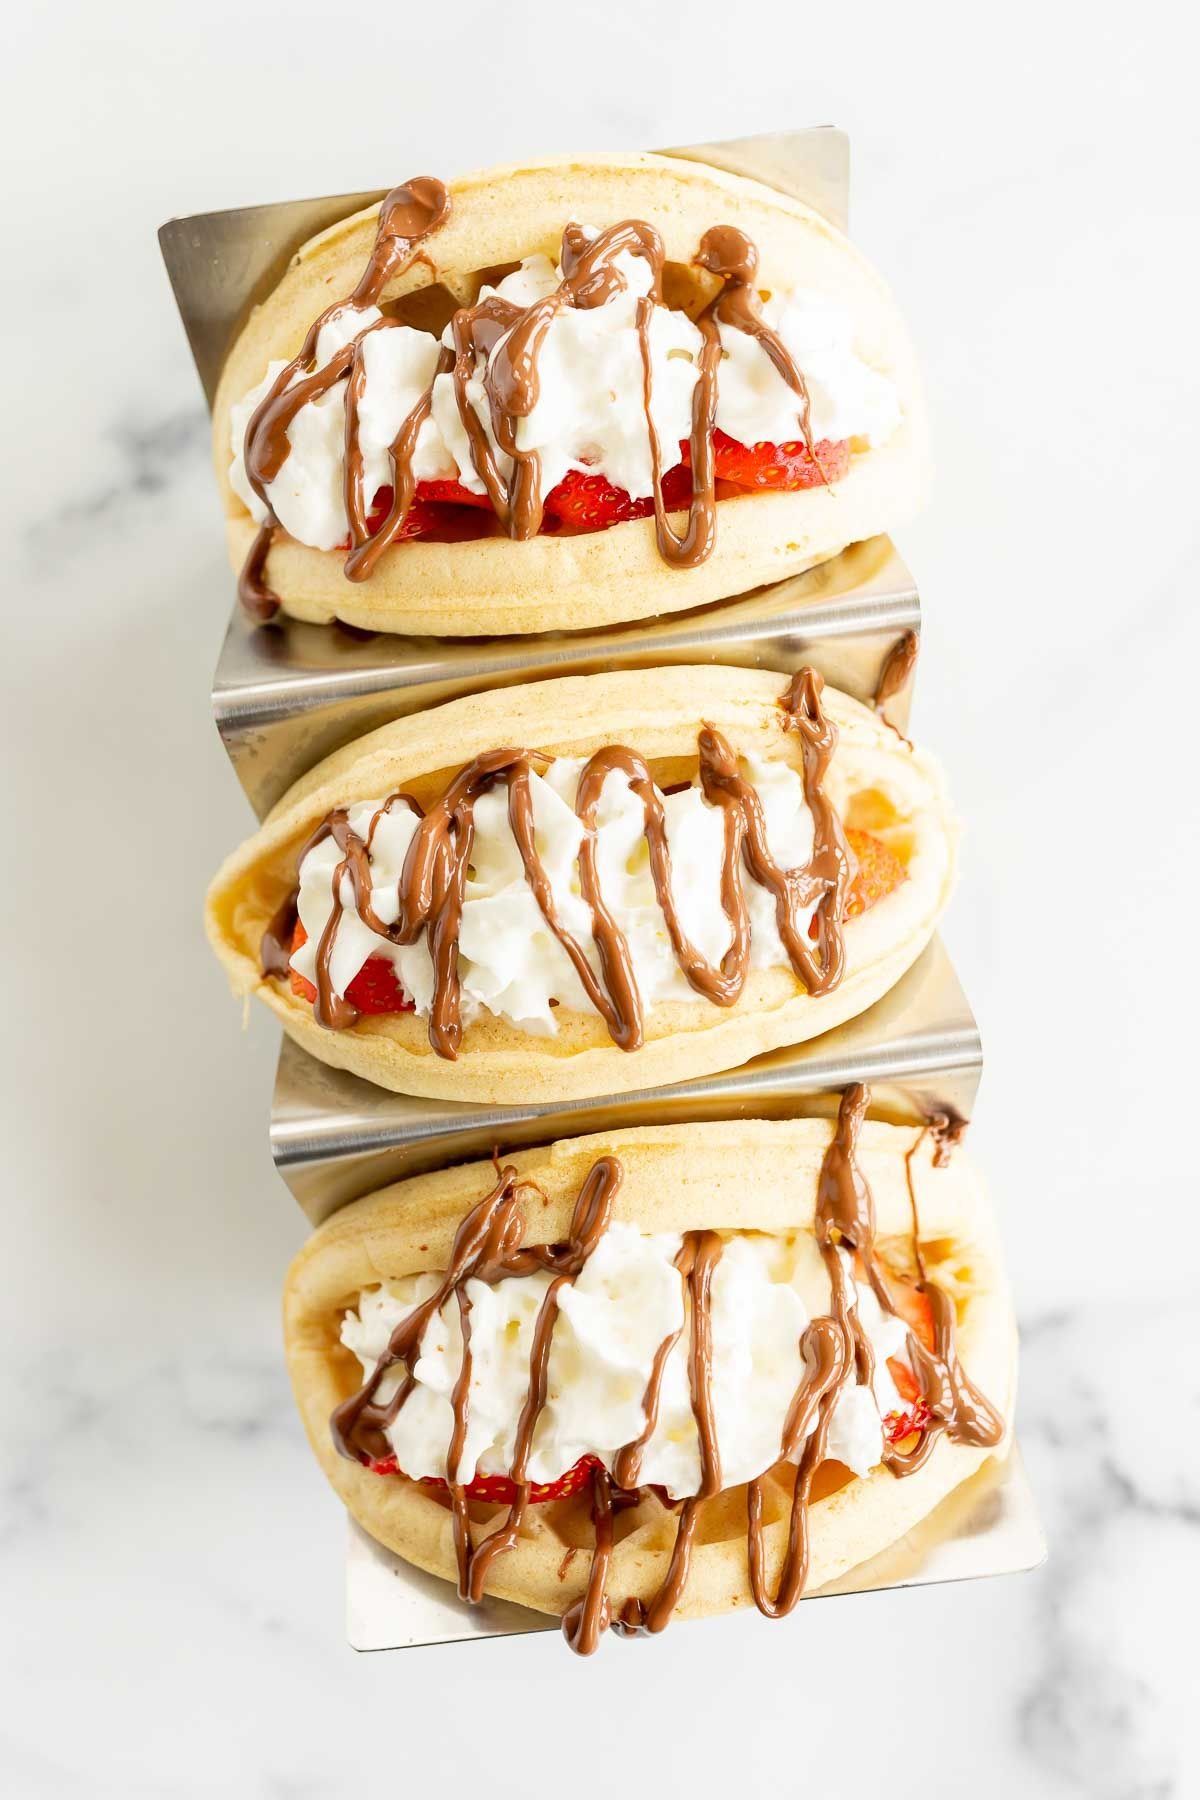 Waffle tacos on a stainless steel taco holder, filled with sweet ingredients